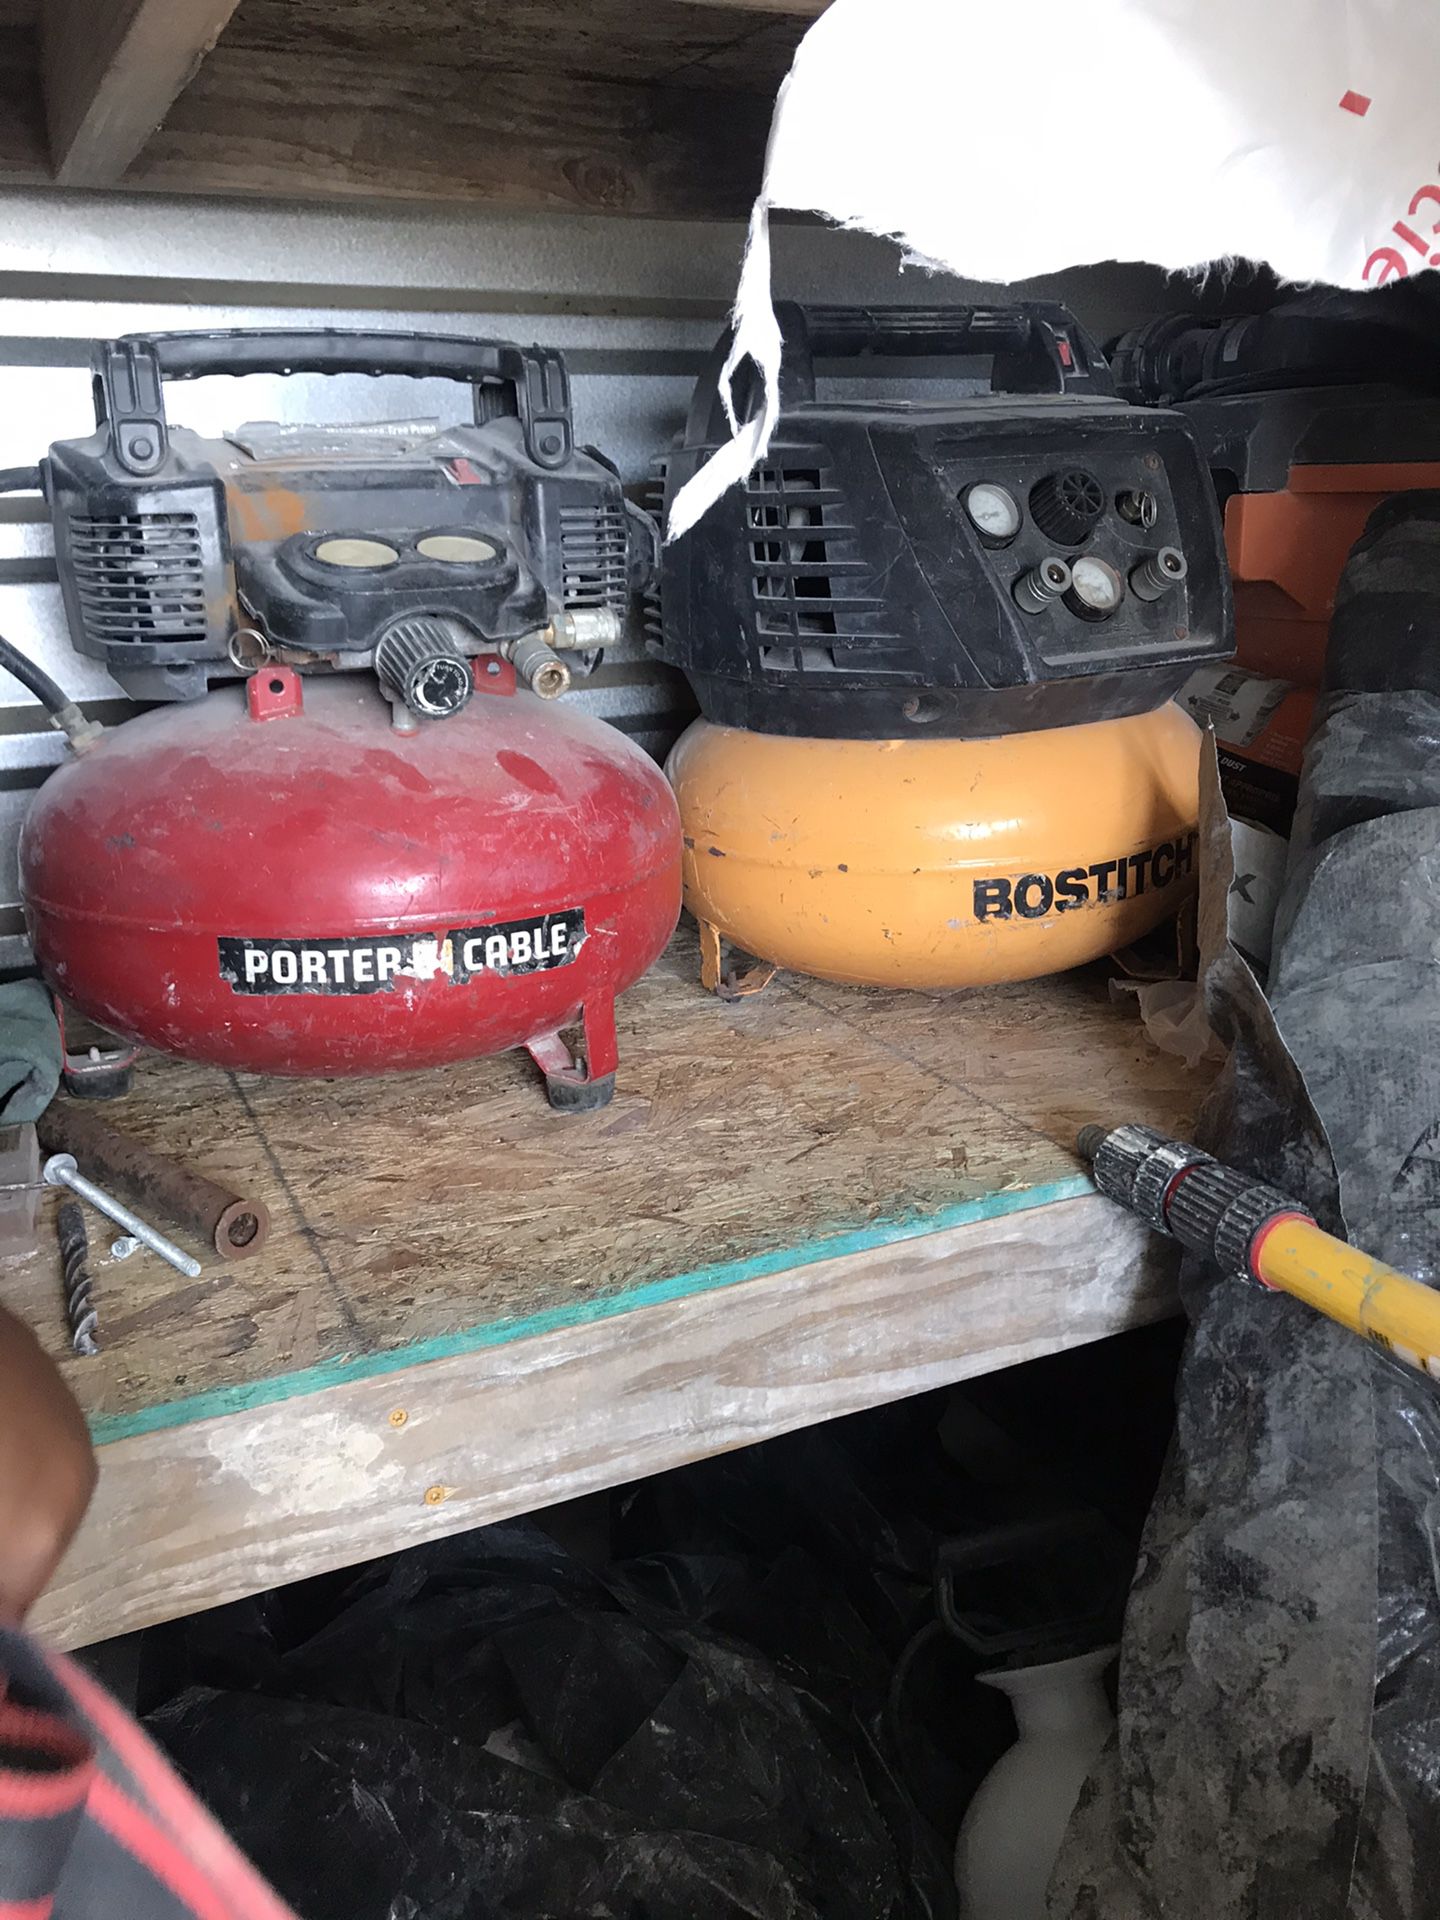 Air compressors $100 total for both